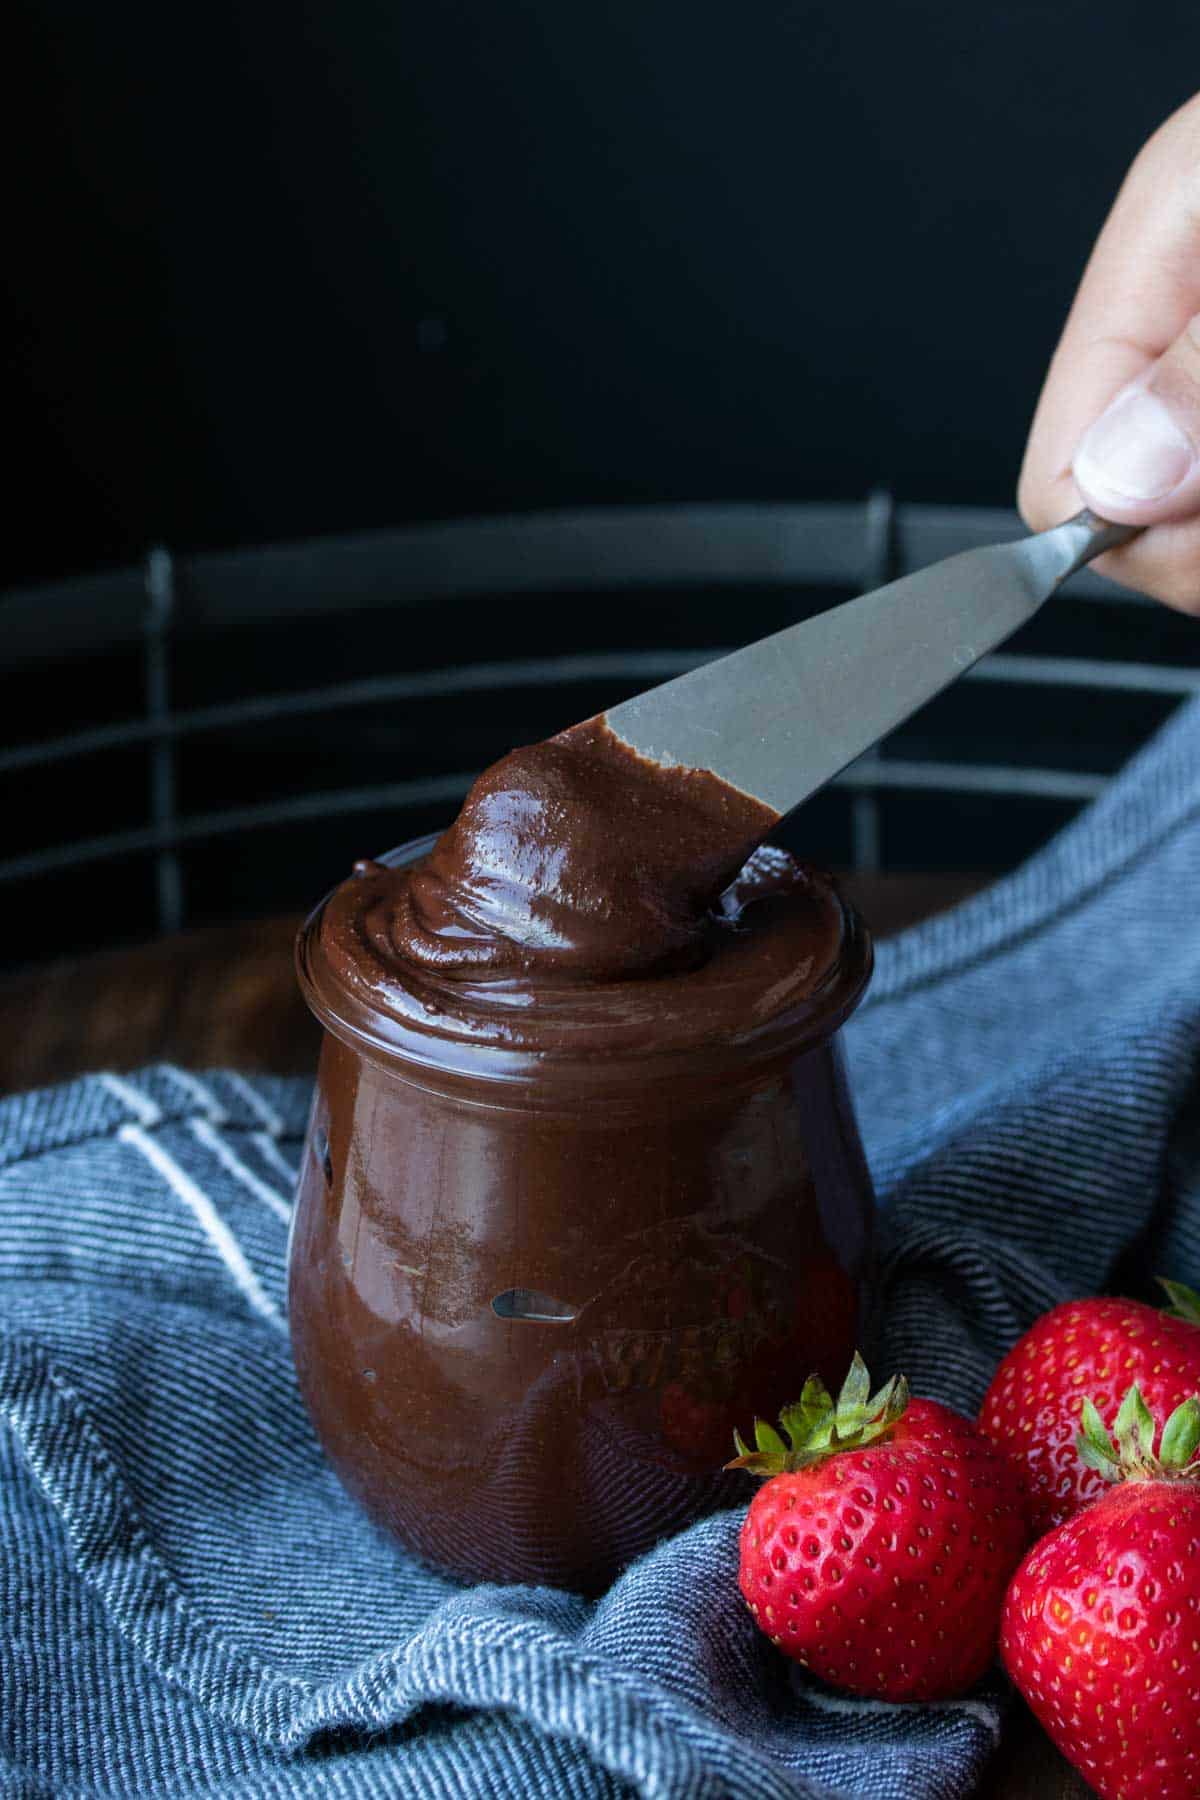 A glass jar full of Nutella and a knife getting a scoop out